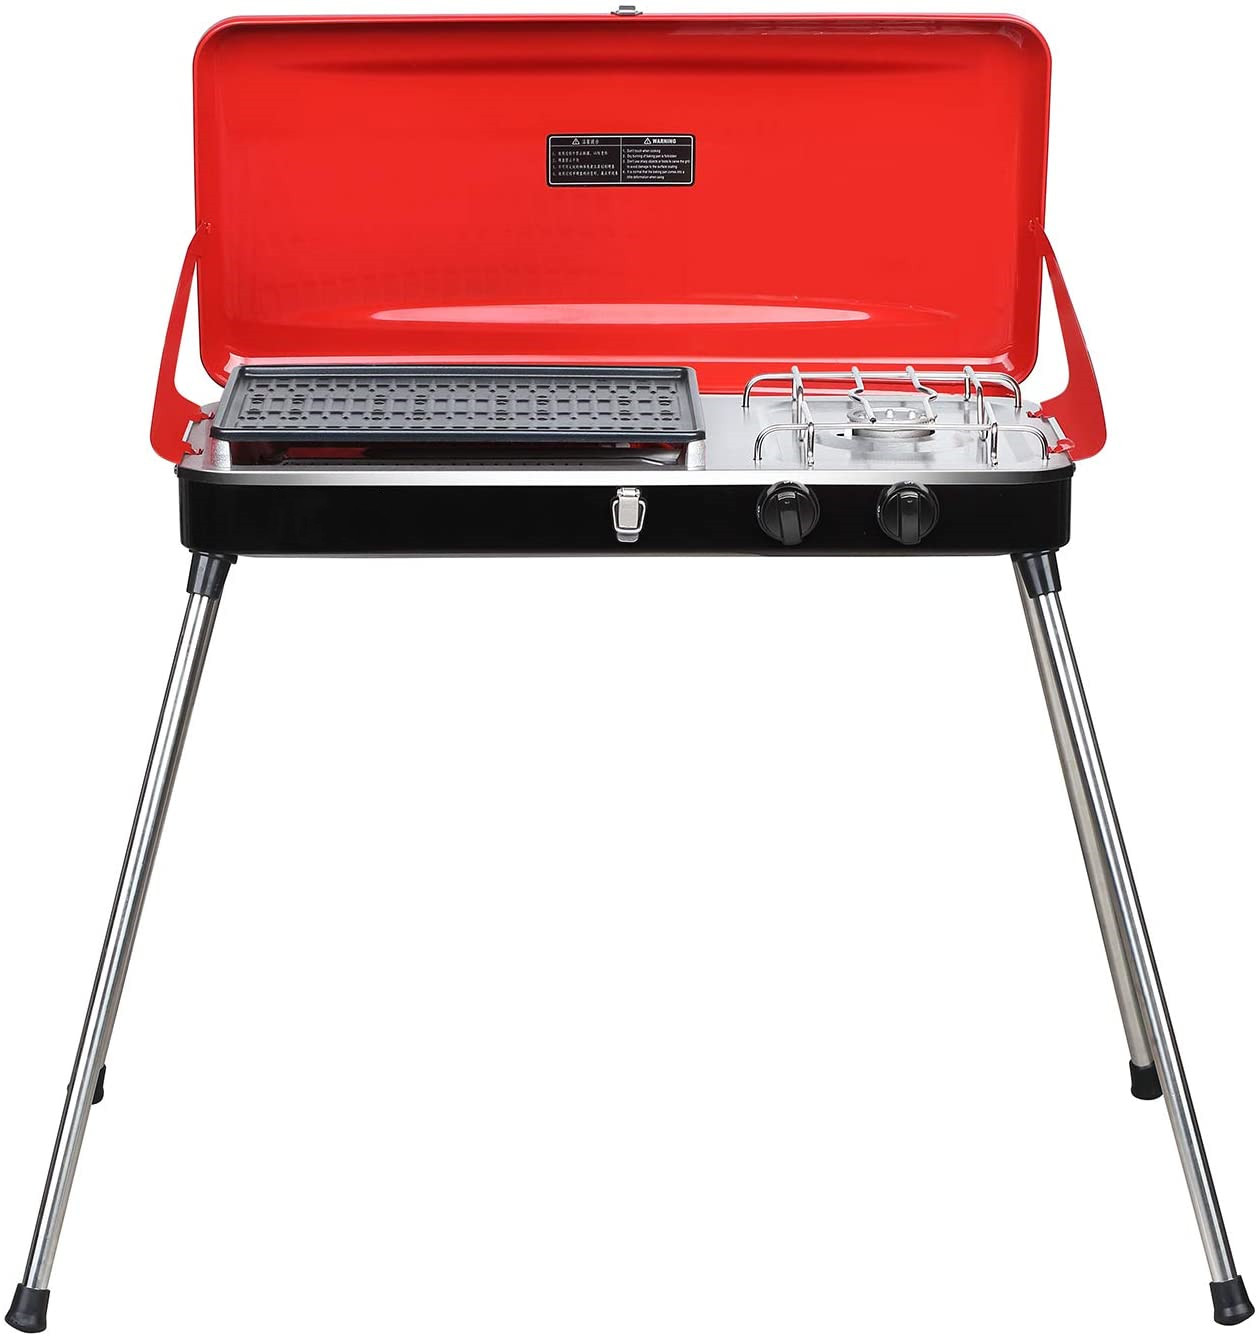 Camping Gas Stove & Barbecue Grill